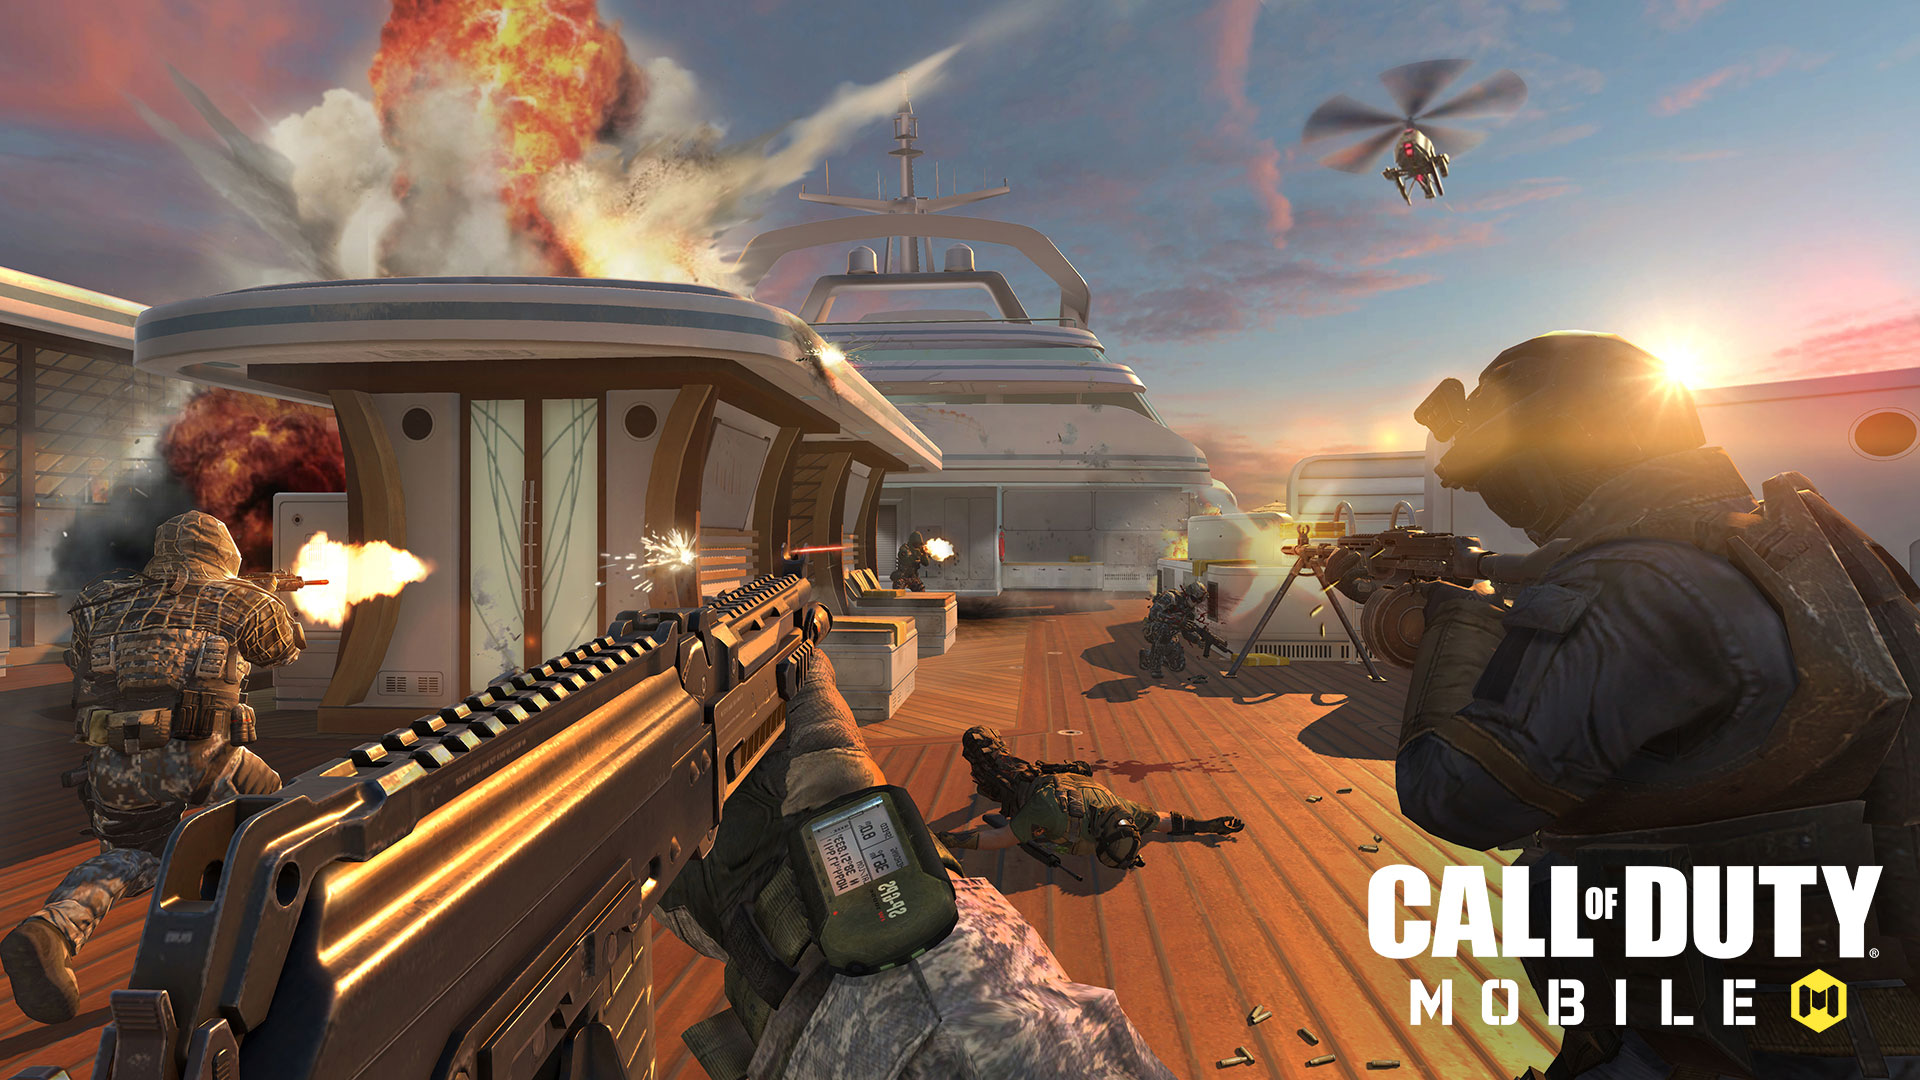 Калов дьюти плей маркет. Call of Duty mobile. Call of Duty mobile мобайл. Call of Duty 4 mobile. Call of Duty mobile Gameplay.